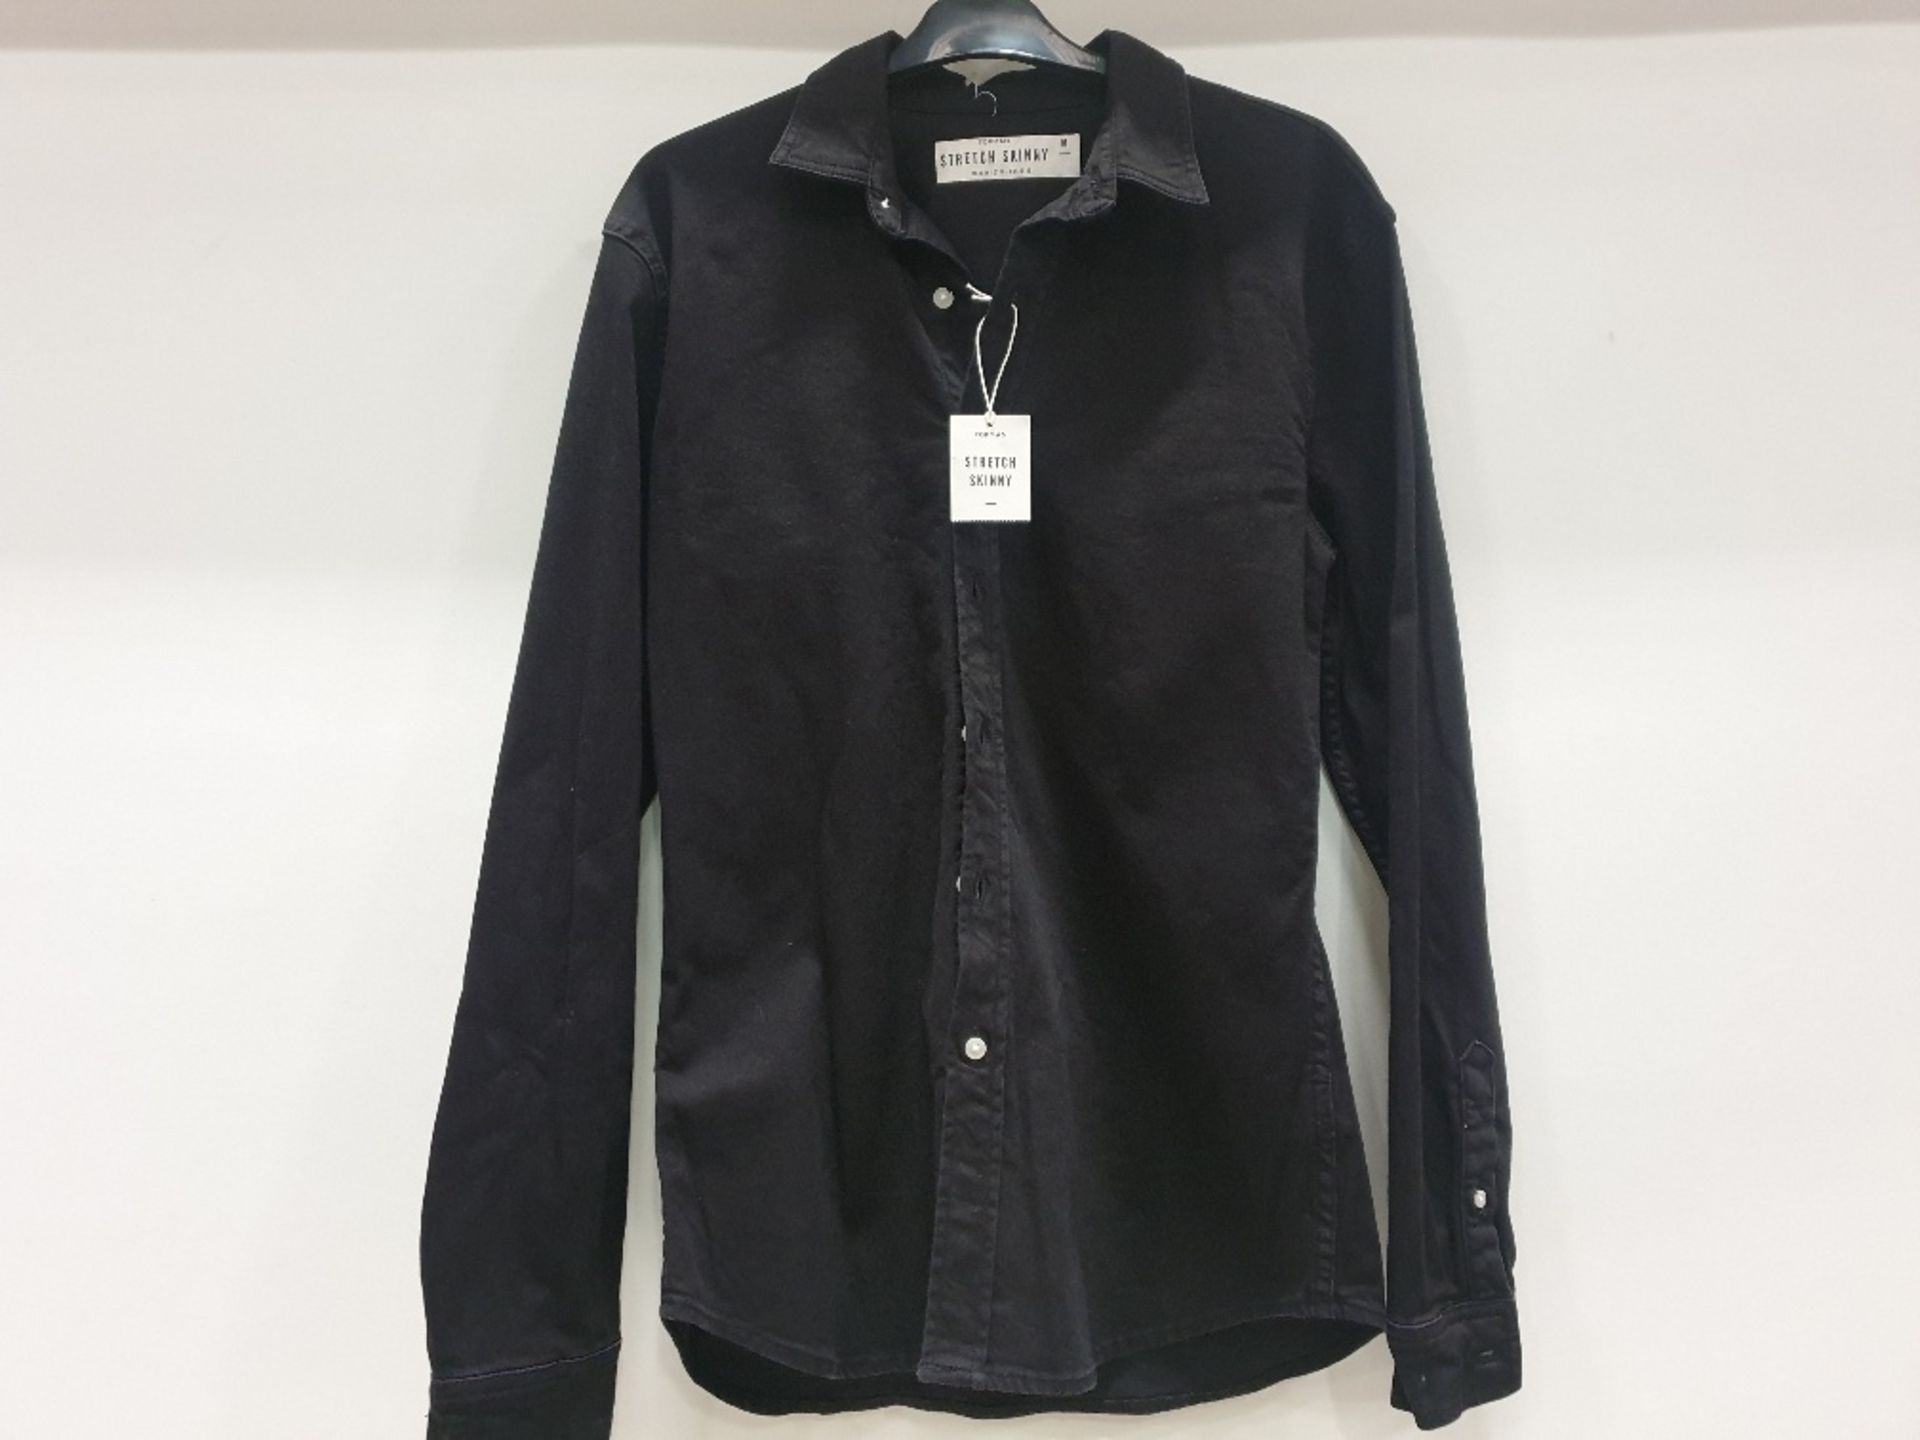 APPROX 9 X BRAND NEW BLACK TOPMAN DENIM SHIRT IN VARIOUS DIFFERENT STYLES AND SIZES